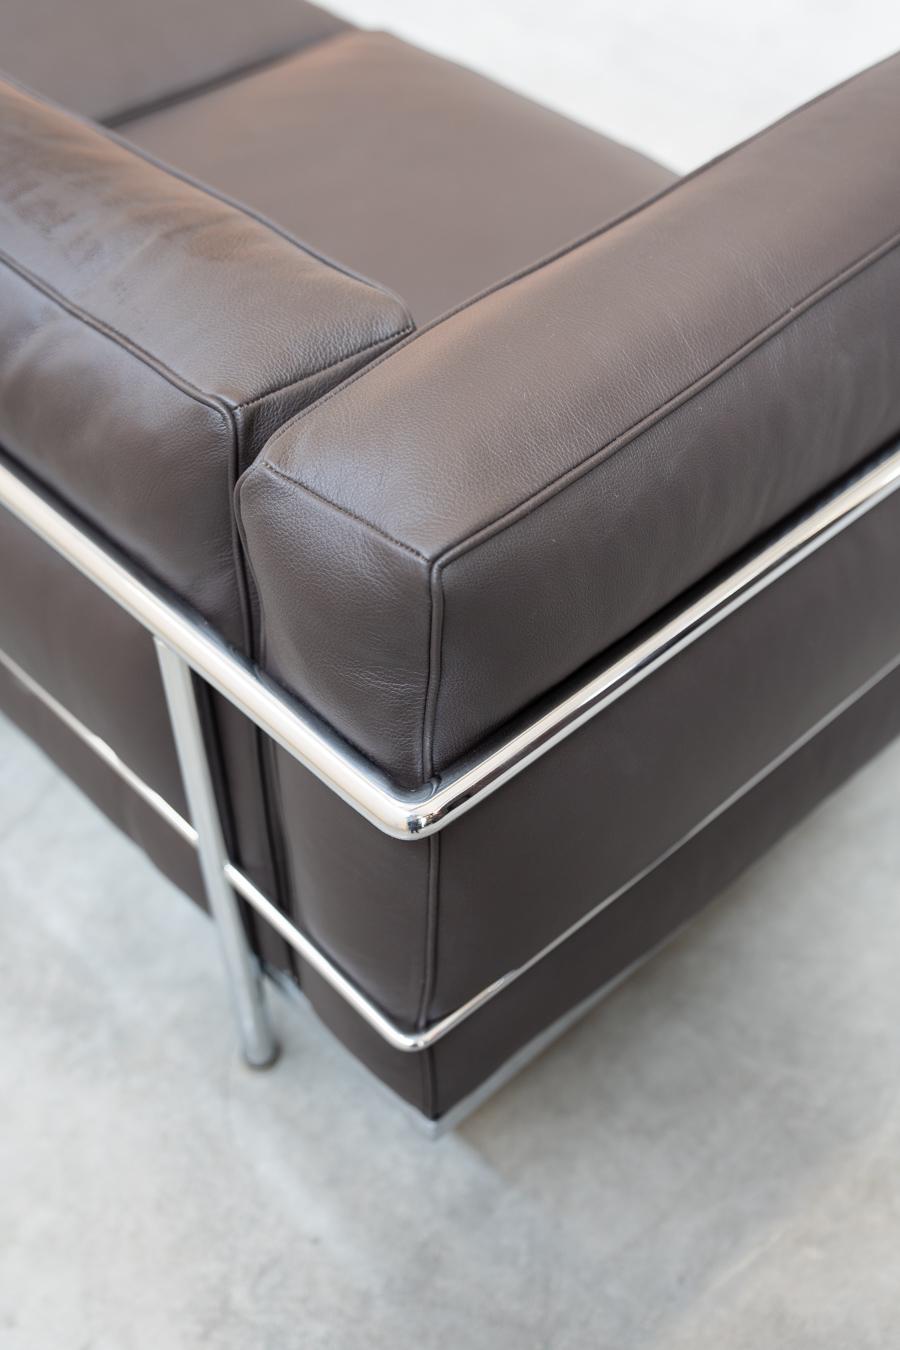 Sofa 2 seat  LC3 by Le Corbusier, Pierre Jenneret and Charlotte Perriand, for Cassina, 1990
Dark brown leather, chrome iron frame and black leather cushions with removable covers. With a modernist design, it is the epitome of timeless elegance and